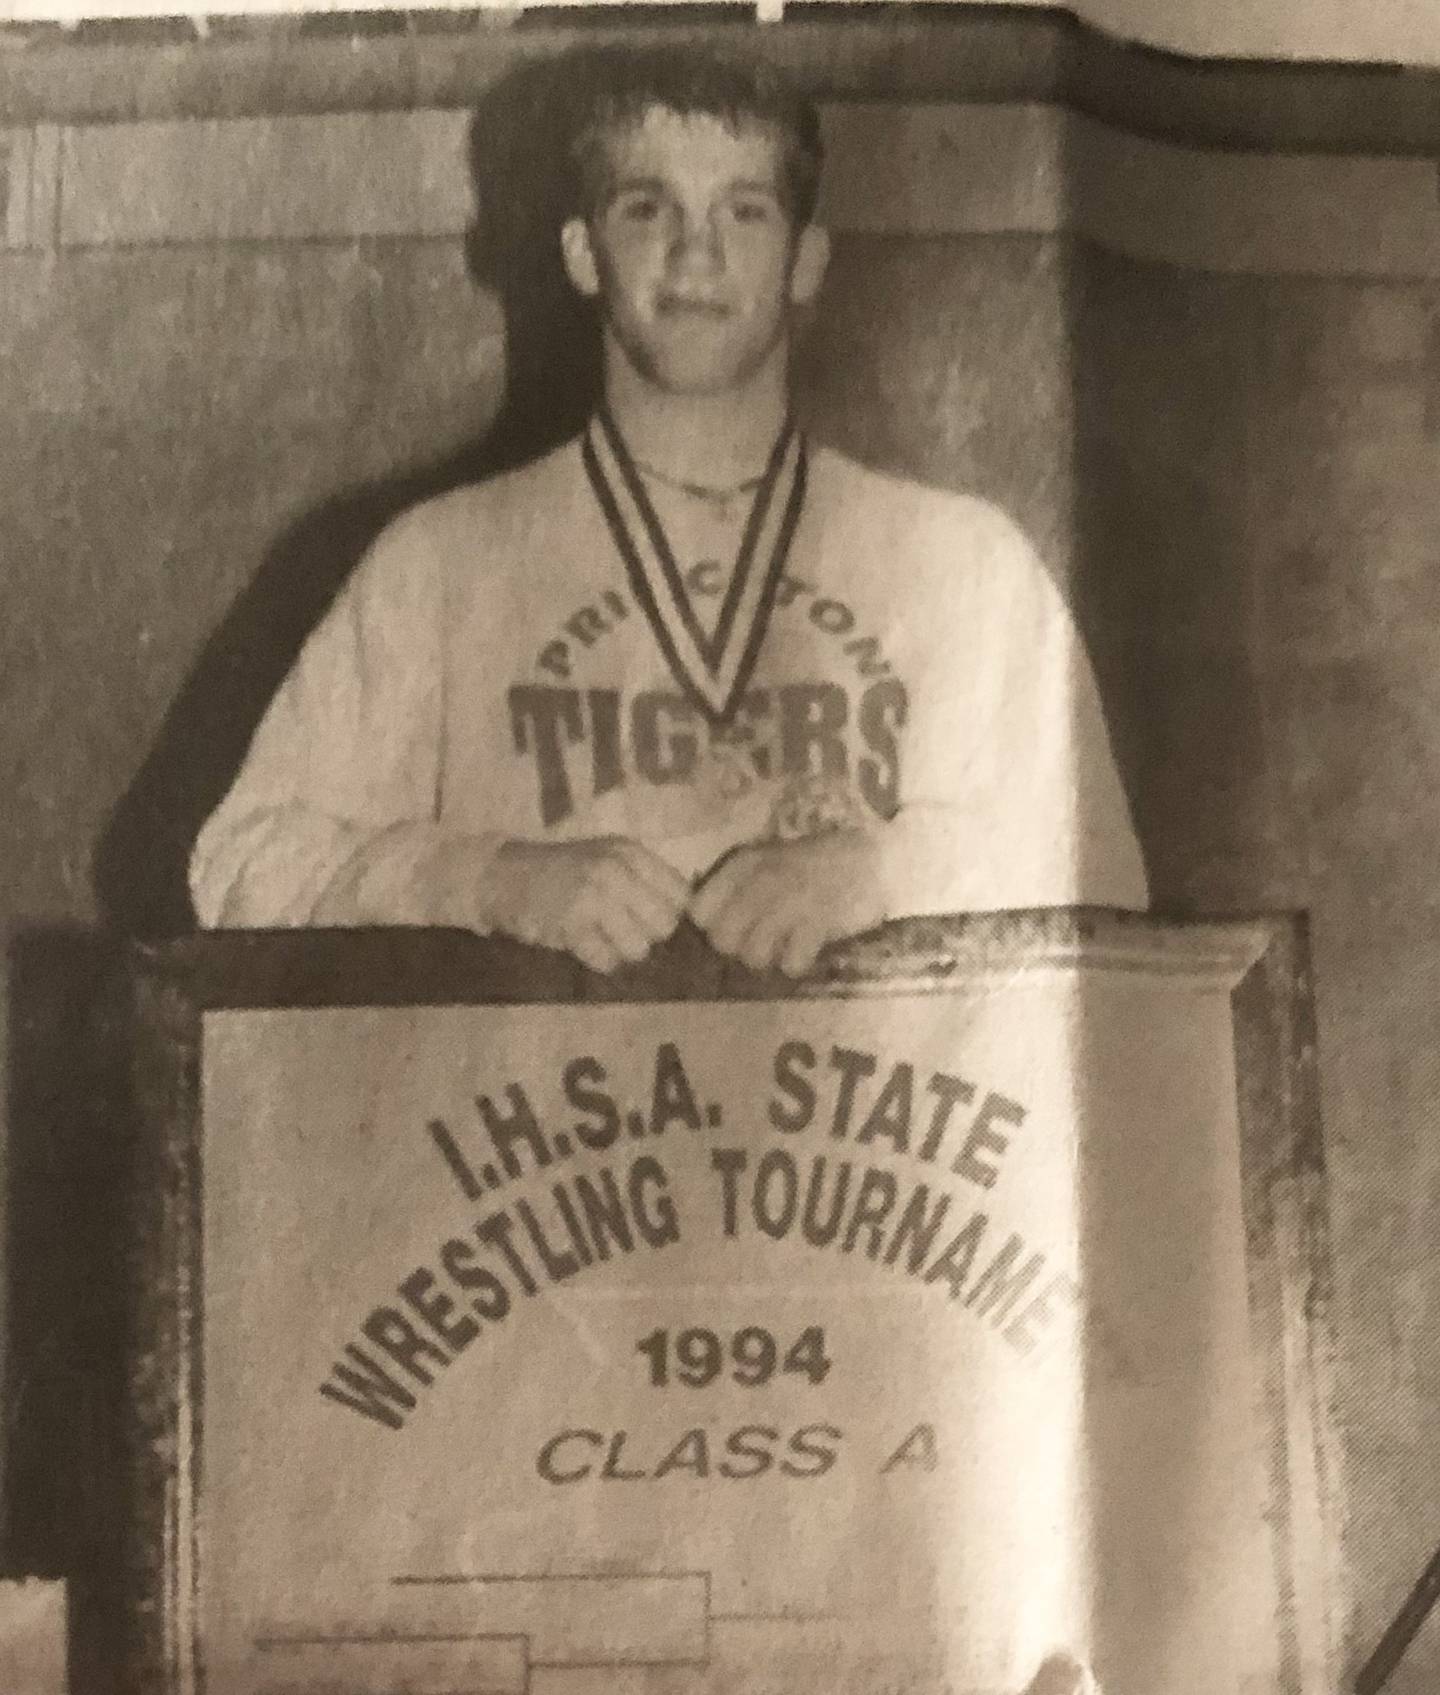 Kristian Wahlgren was an IHSA State wrestling champion for Princeton in 1993 and 1994.